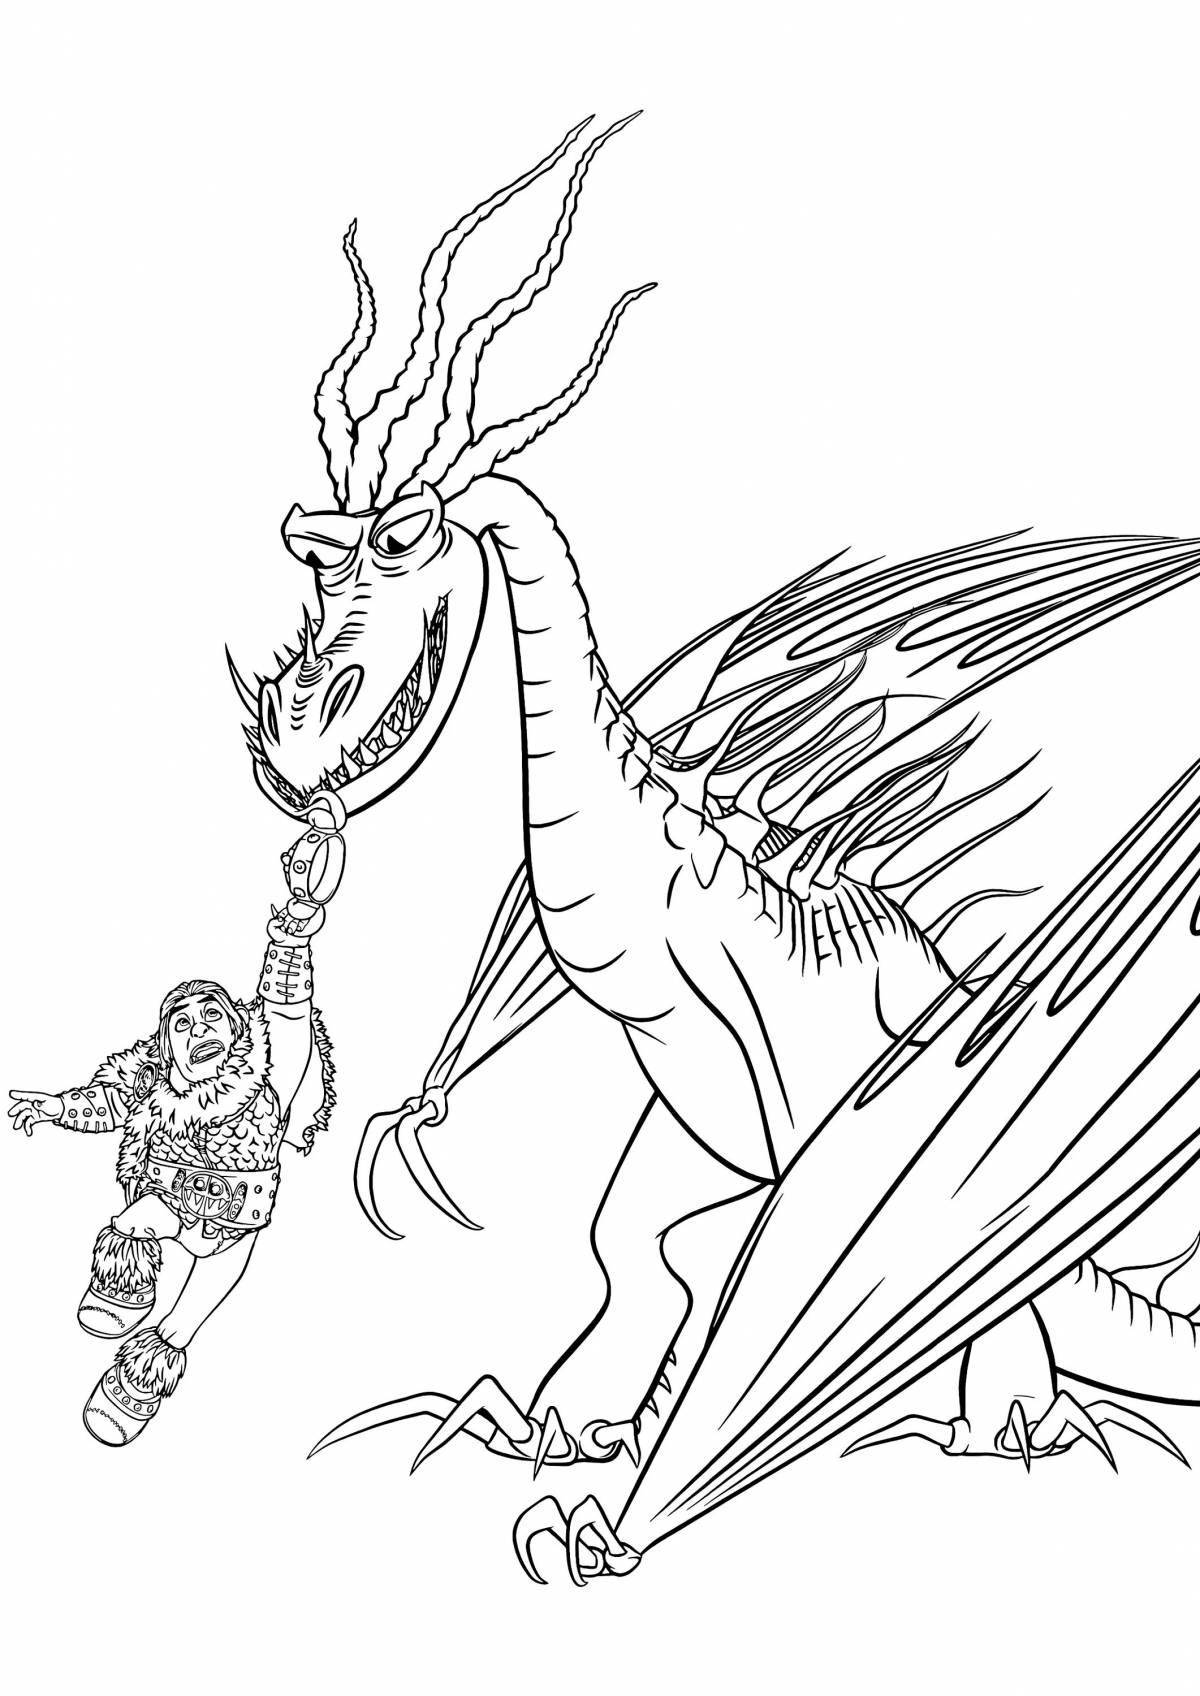 How to train your dragon 2 coloring book